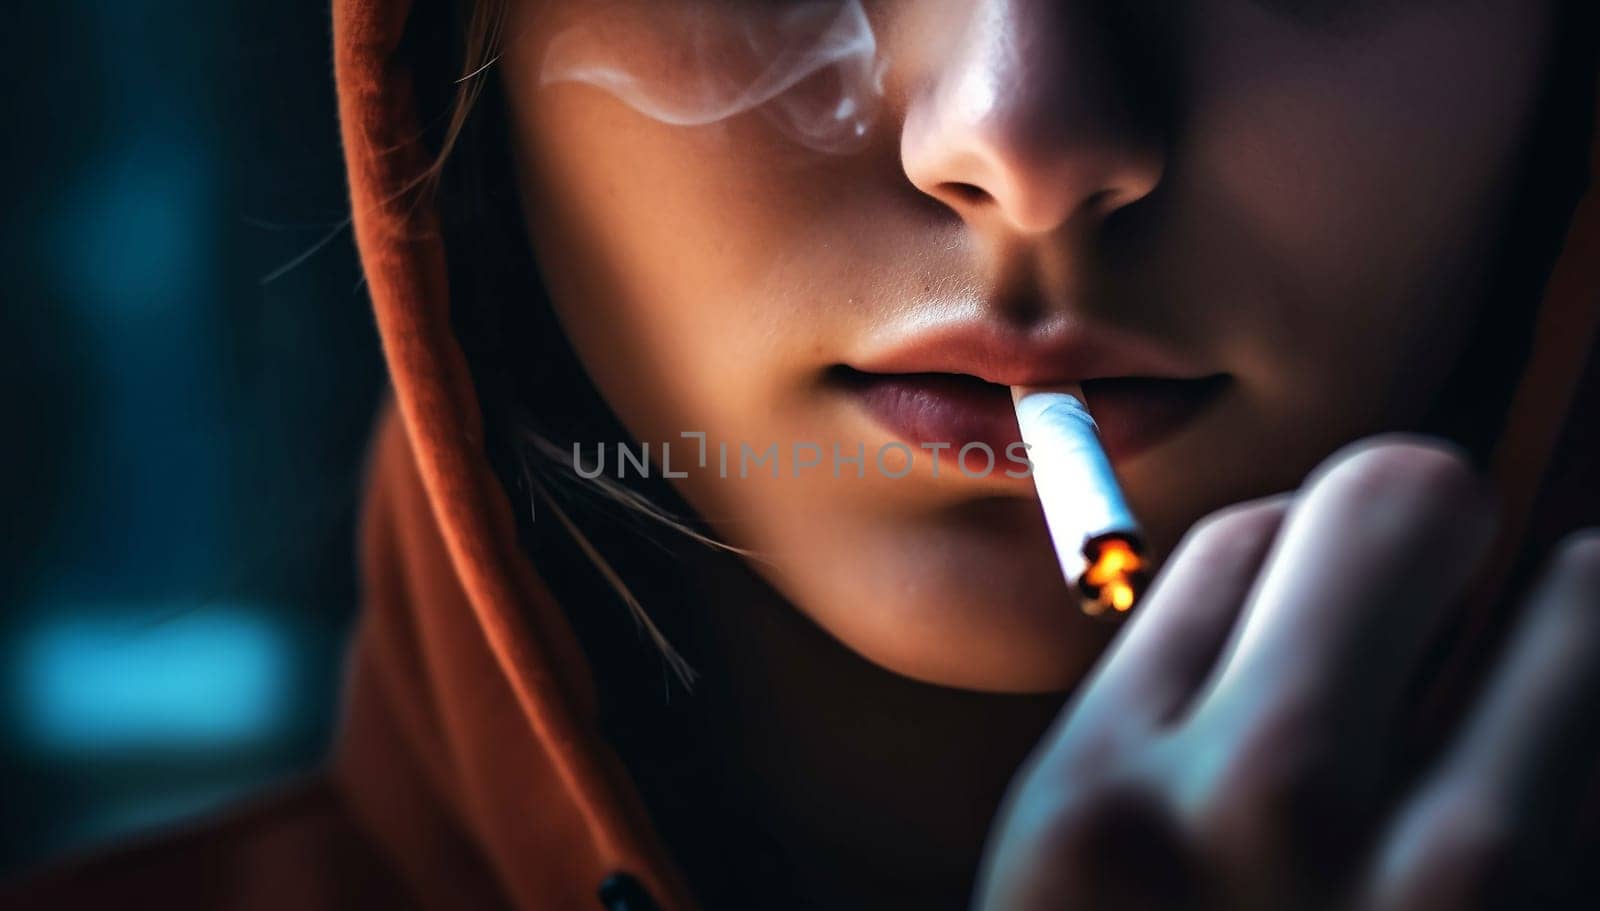 Concept for smoking in front of the child kid. A little child smoking a cigarette. Bad influence concept. Bad habit,health and safety and addiction background copy space by Annebel146